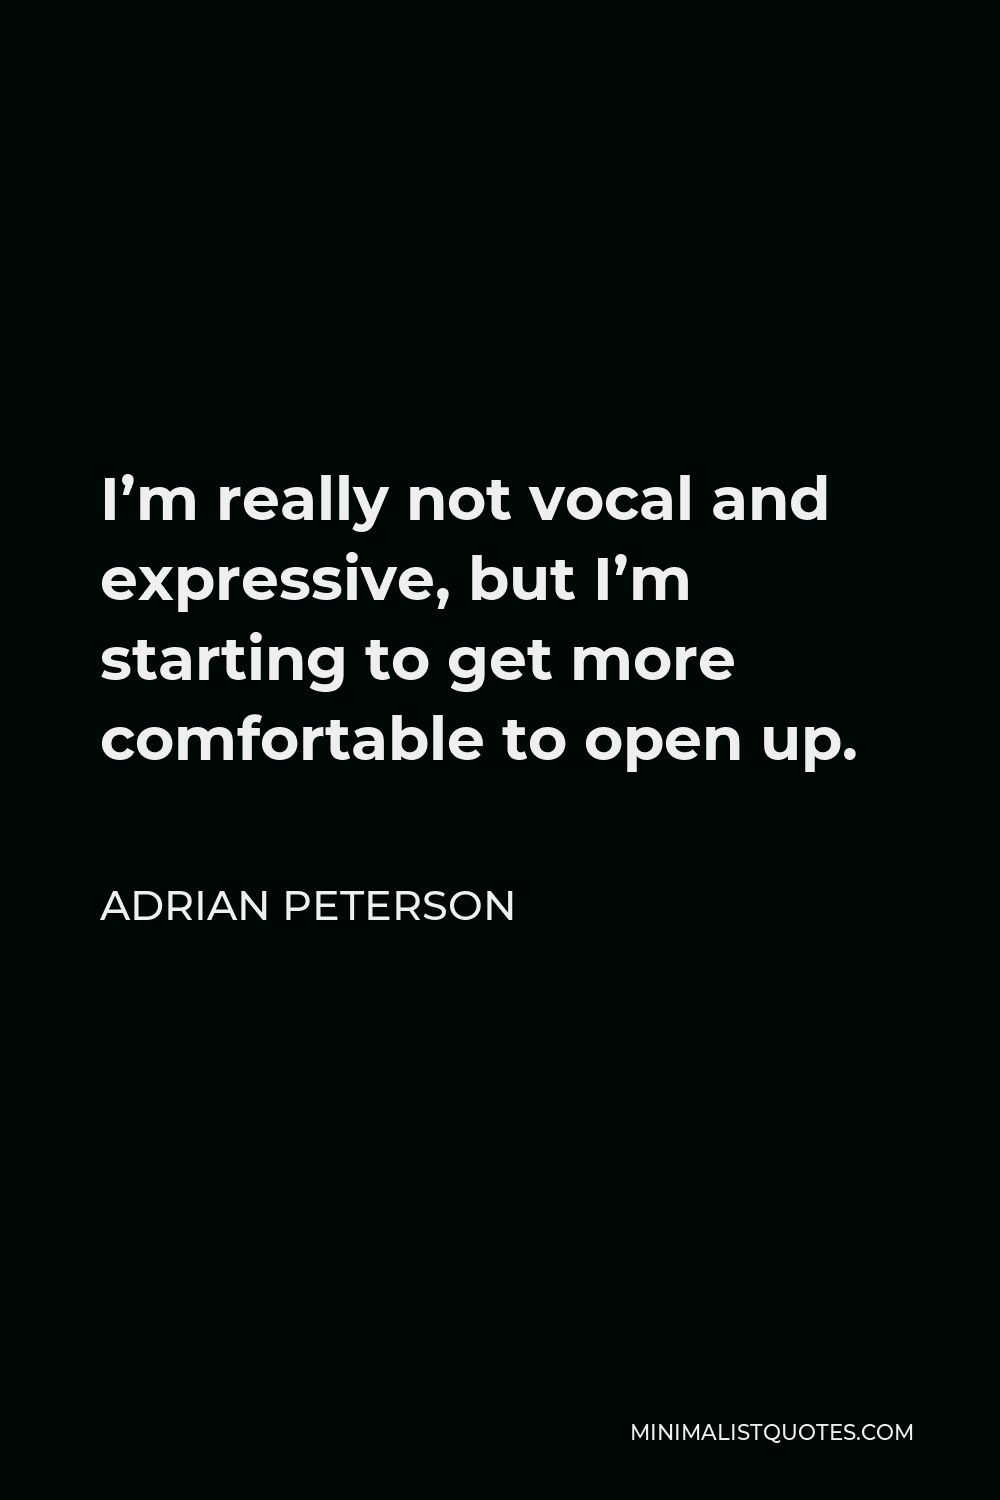 Adrian Peterson Quote - I’m really not vocal and expressive, but I’m starting to get more comfortable to open up.